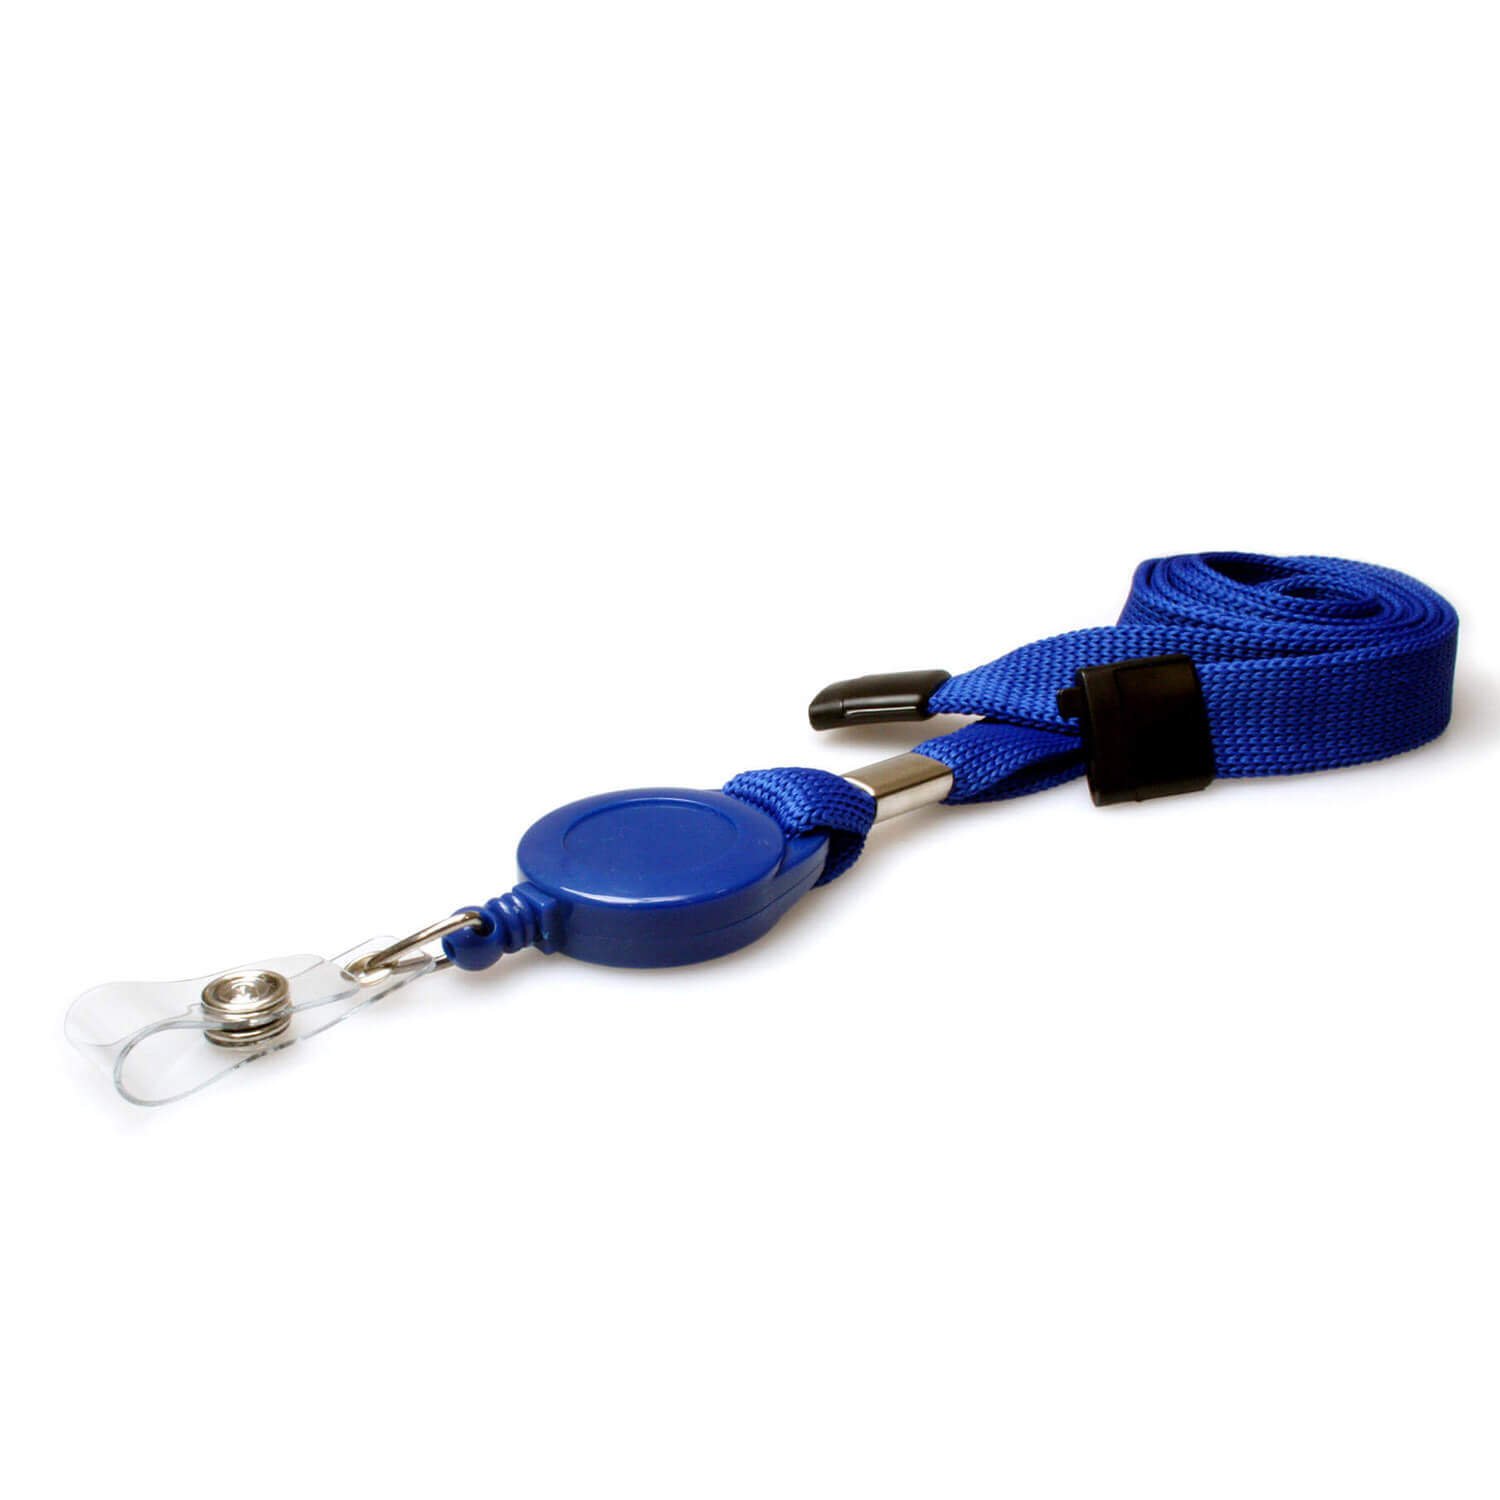 Cute Lanyard id Holder Durable Retractable Lanyards for ID Badges